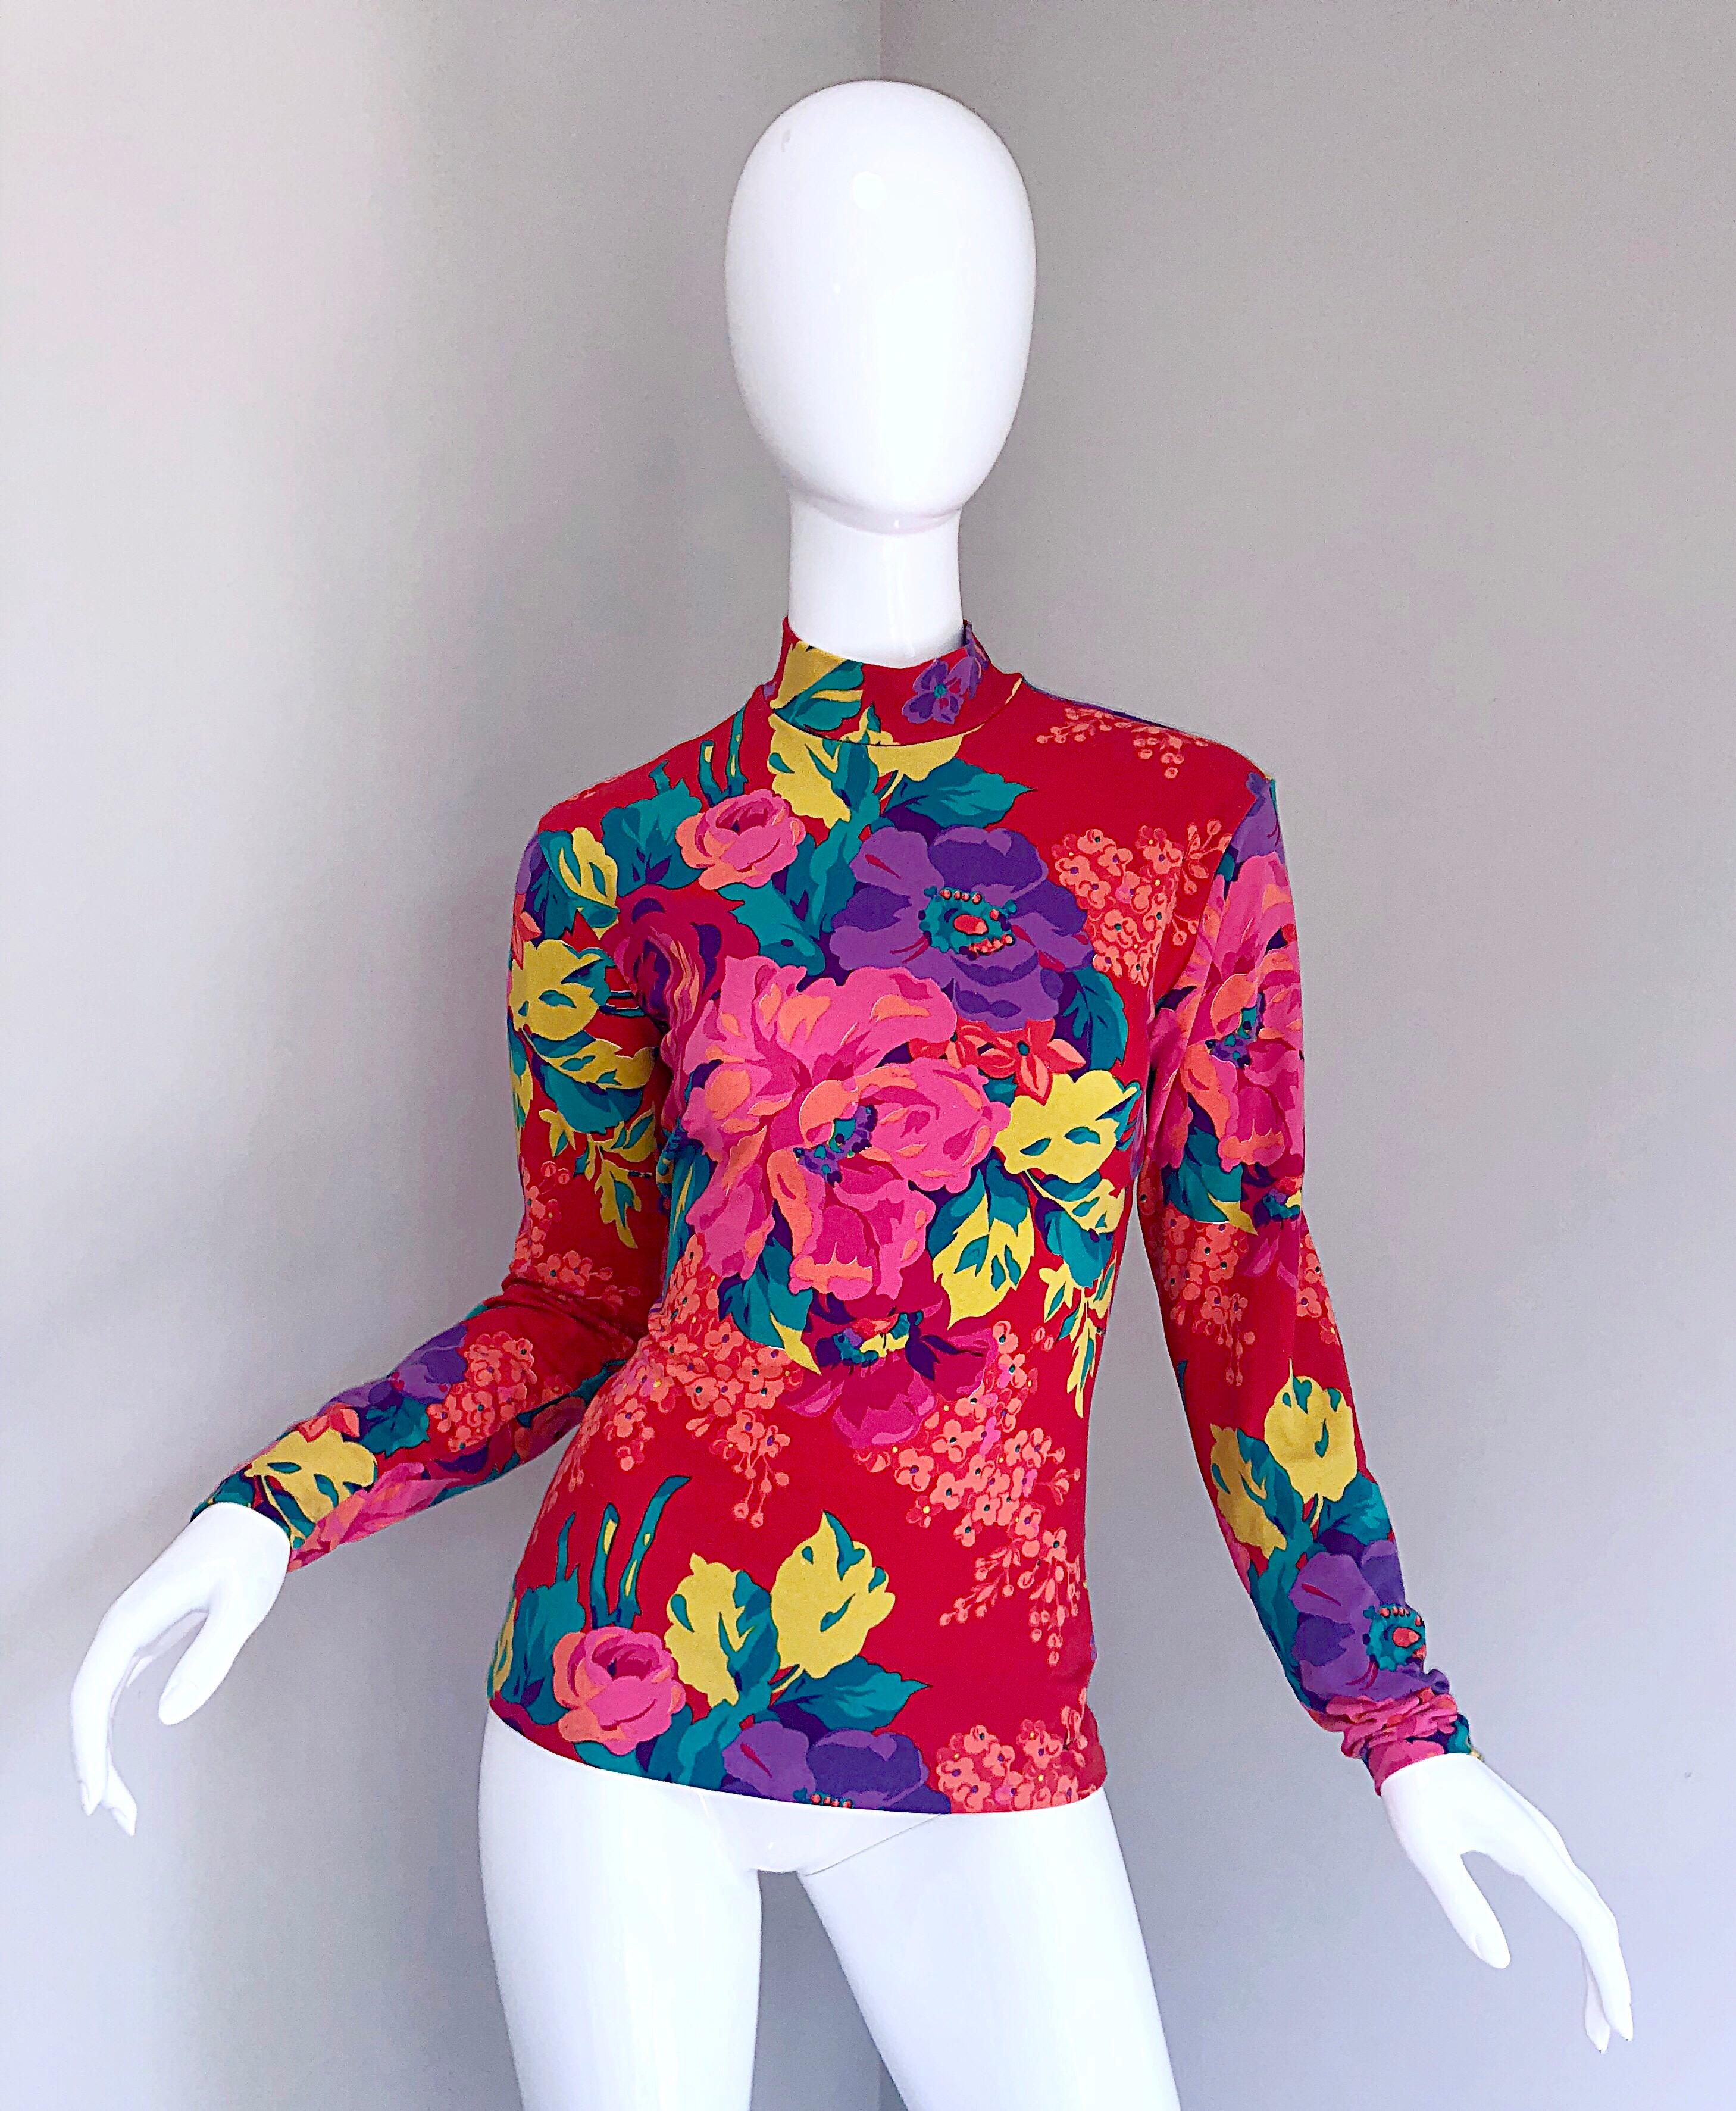 Amazing RARE early 1980s BETSEY JOHNSON Punk Label long sleeve cotton stretch shirt! Features awesome prints in an array of different flowers, including roses, hibiscuses, cherry blossoms, etc. Virant colors of red, pink, fuchsia, purple, green,